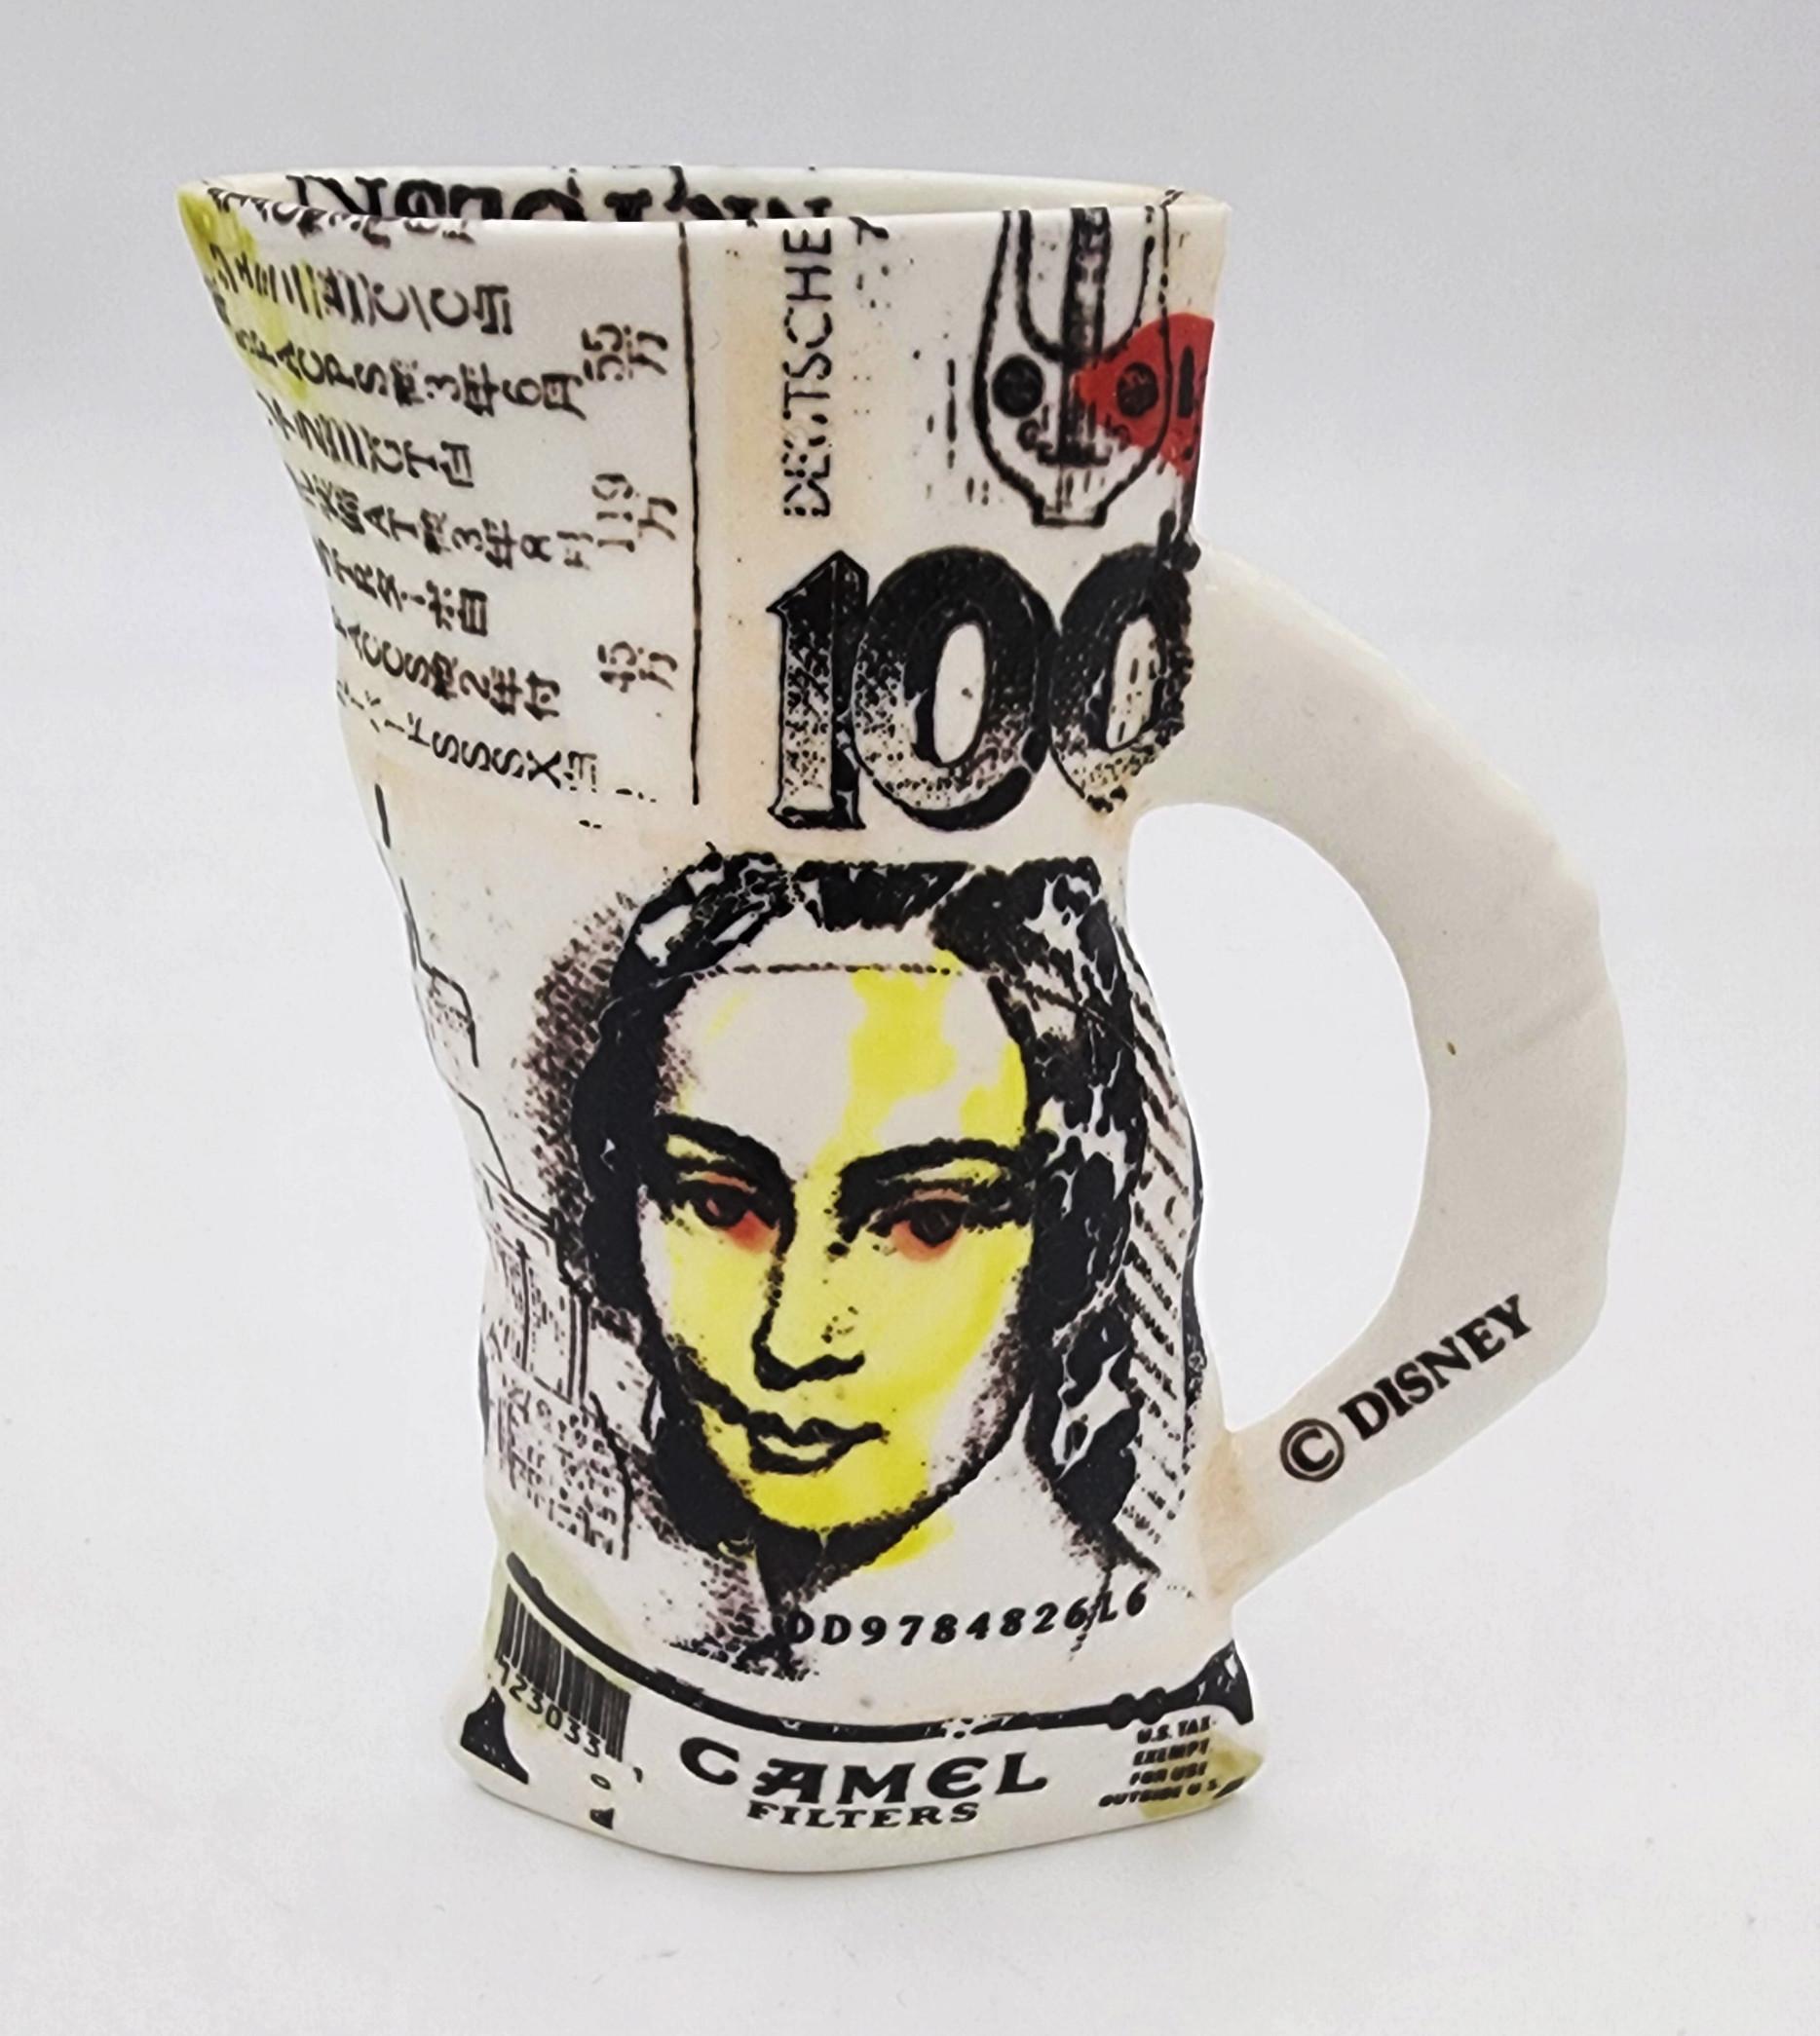 Unknown Artist | In-Style of Juris Bergins
Cup with Handle
Porcelain, Glaze, Image Transfer, Chinapaint
Year: 2000s
Size: 7.5x6.5x3in
Signed
COA provided
Ref.: 24802-1743
*minute chipping on the outside of the top rim

Tags: Porcelain, Glaze, Image